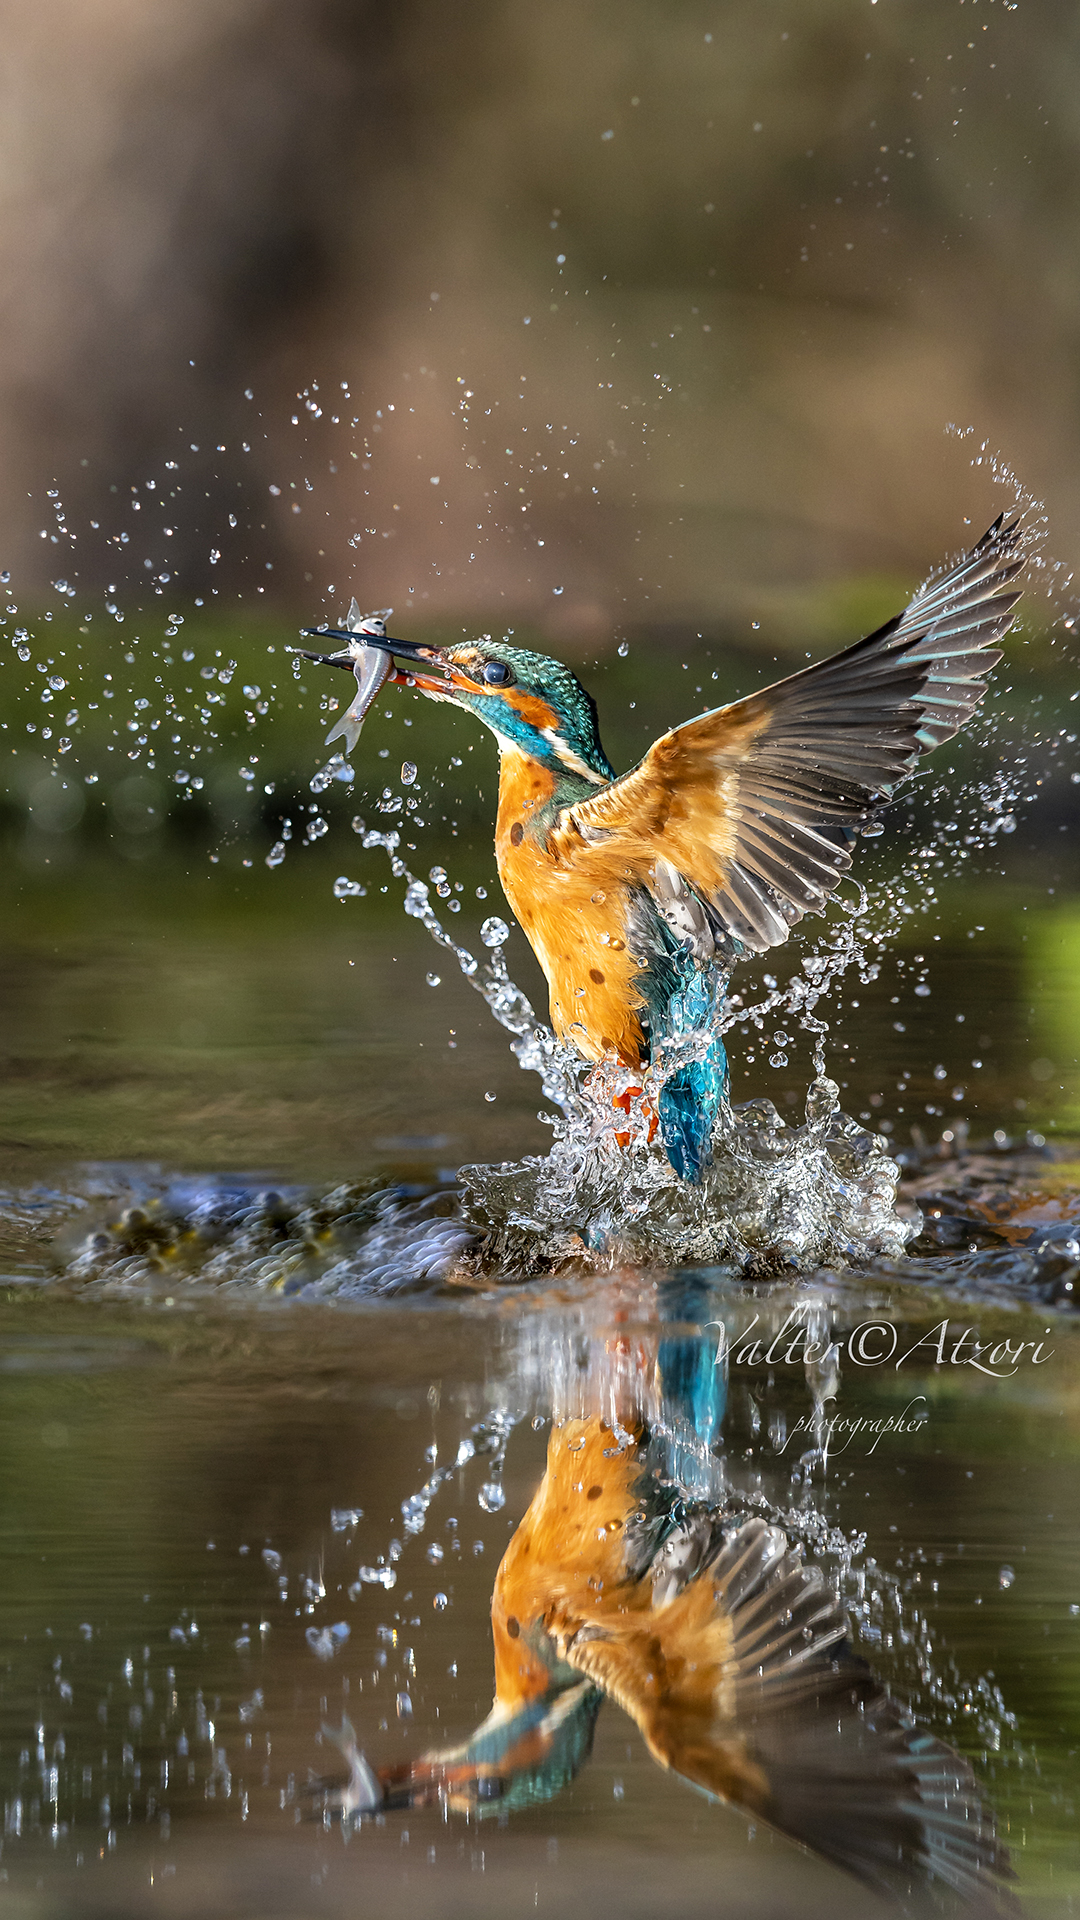 Mirrored kingfisher with Prey...